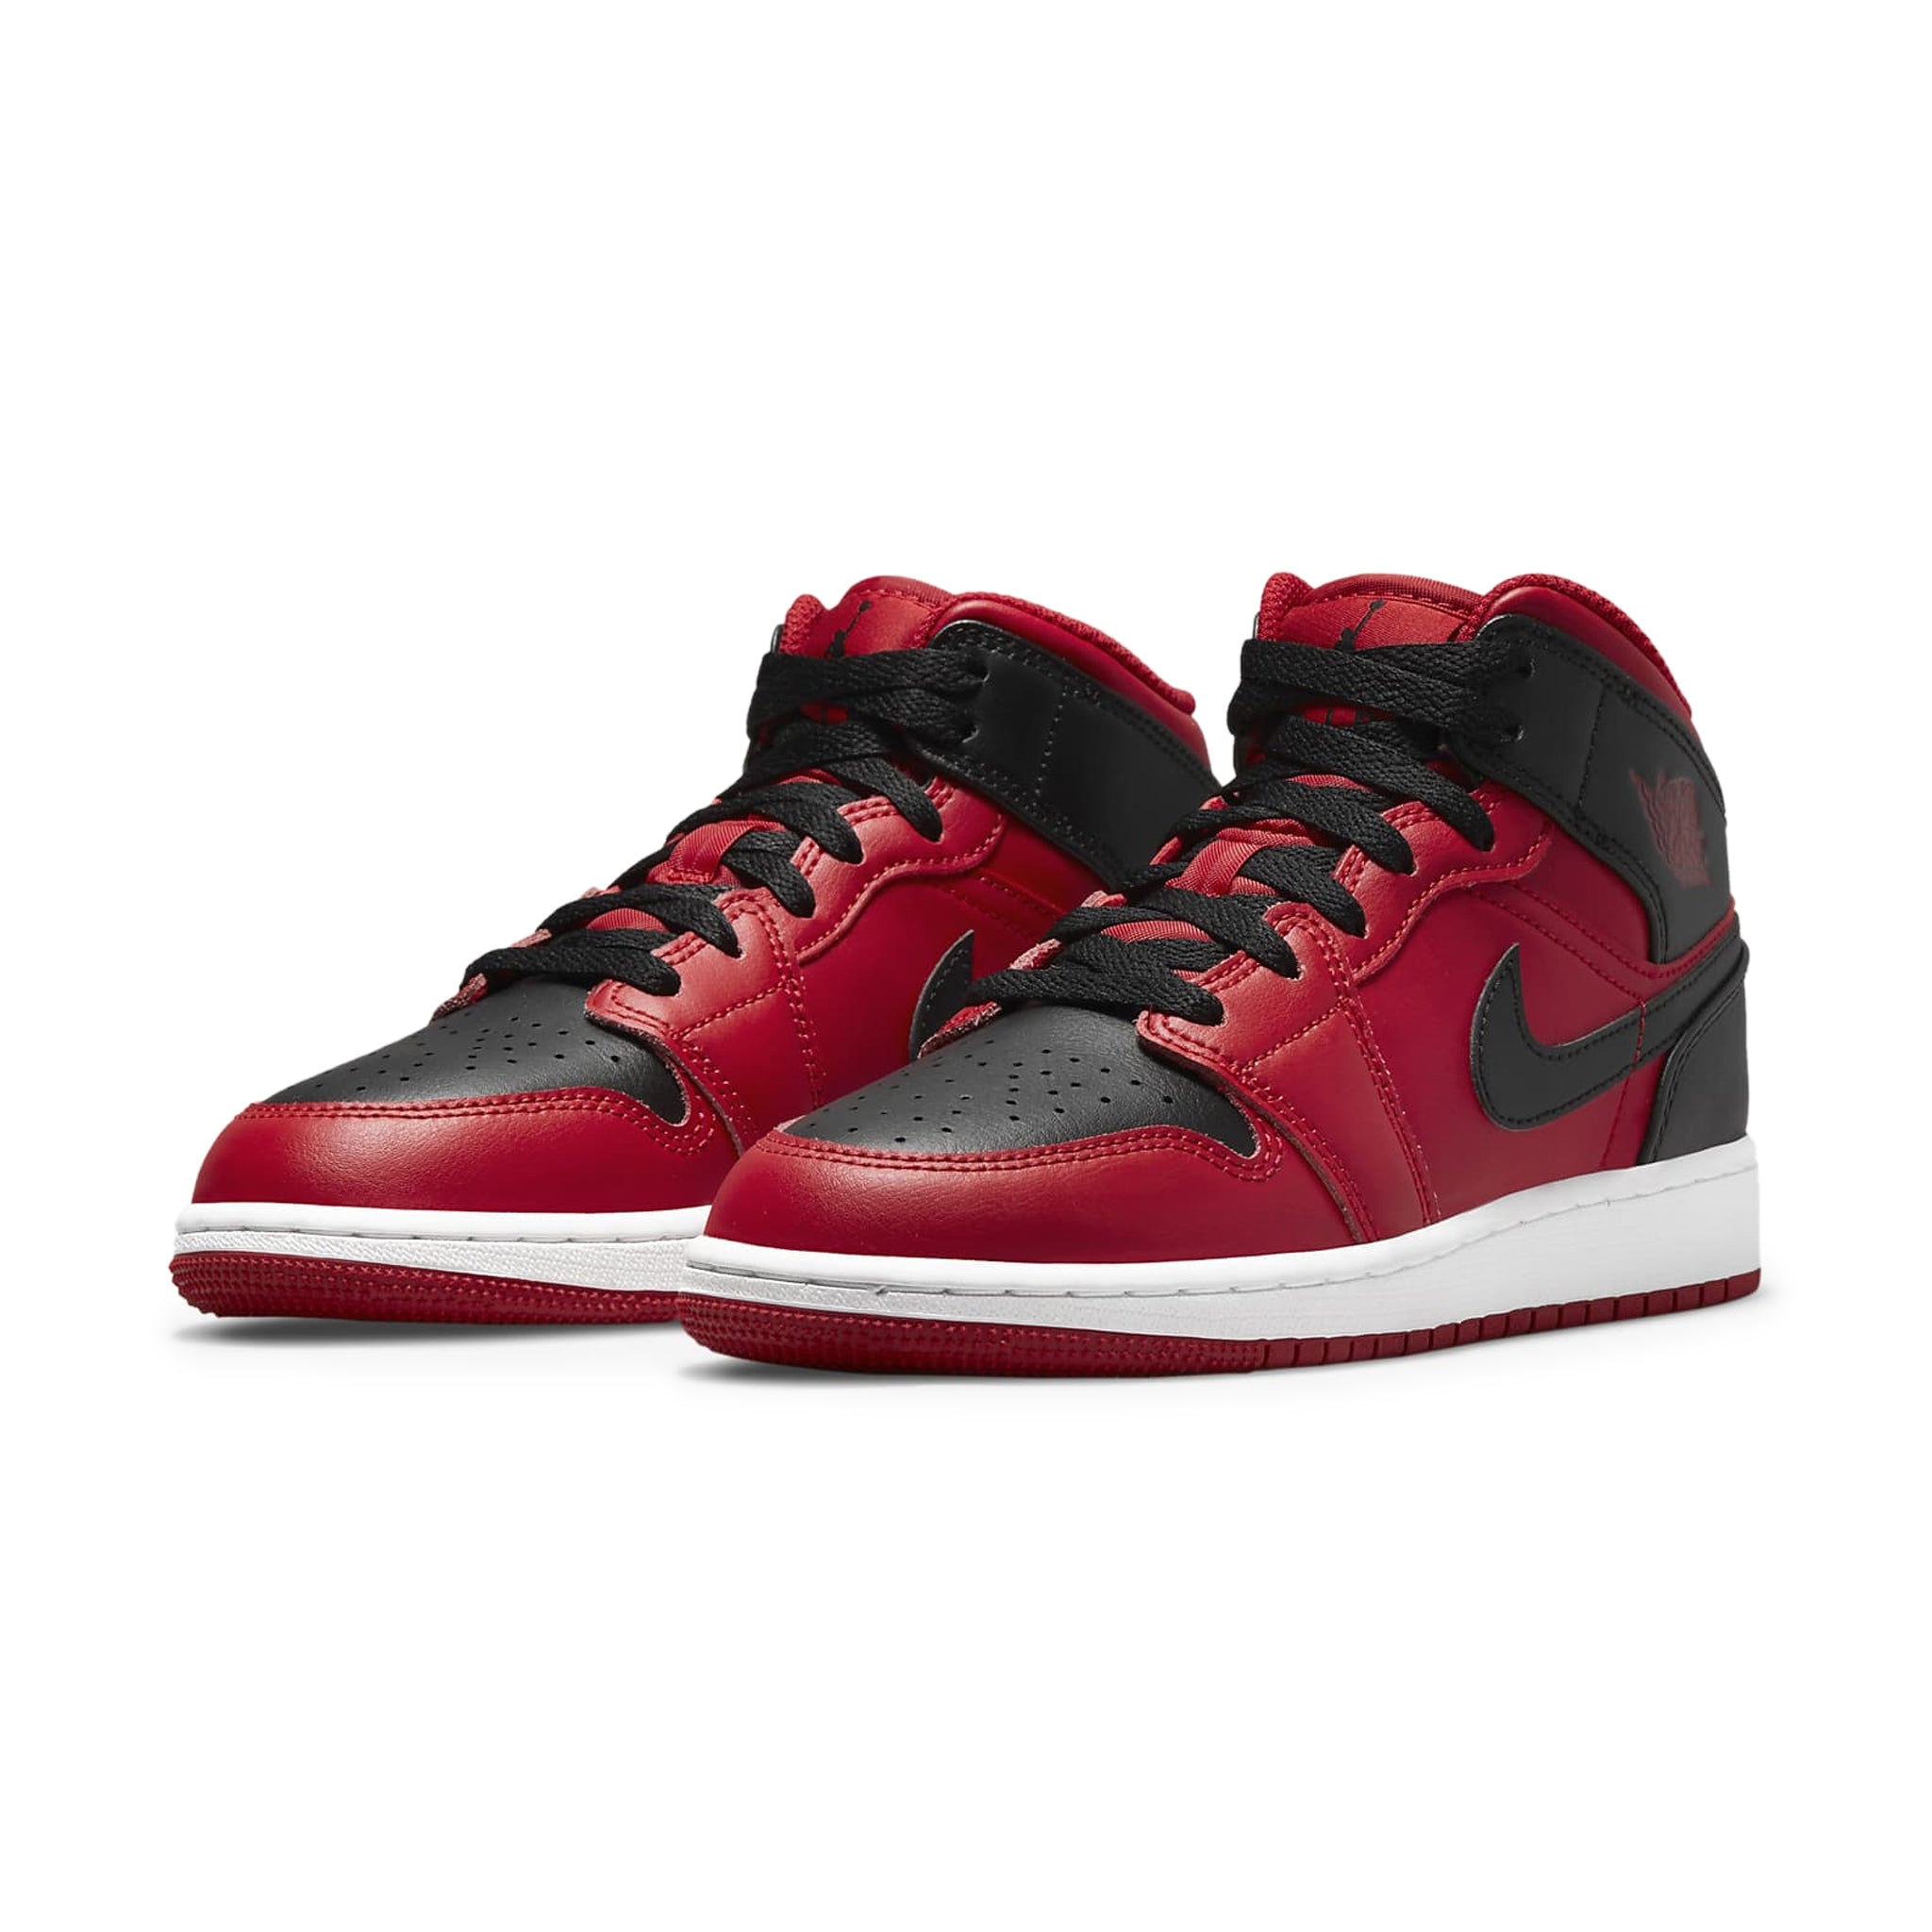 Front side view of Air Jordan 1 Mid Reverse Bred (GS) 554725-660